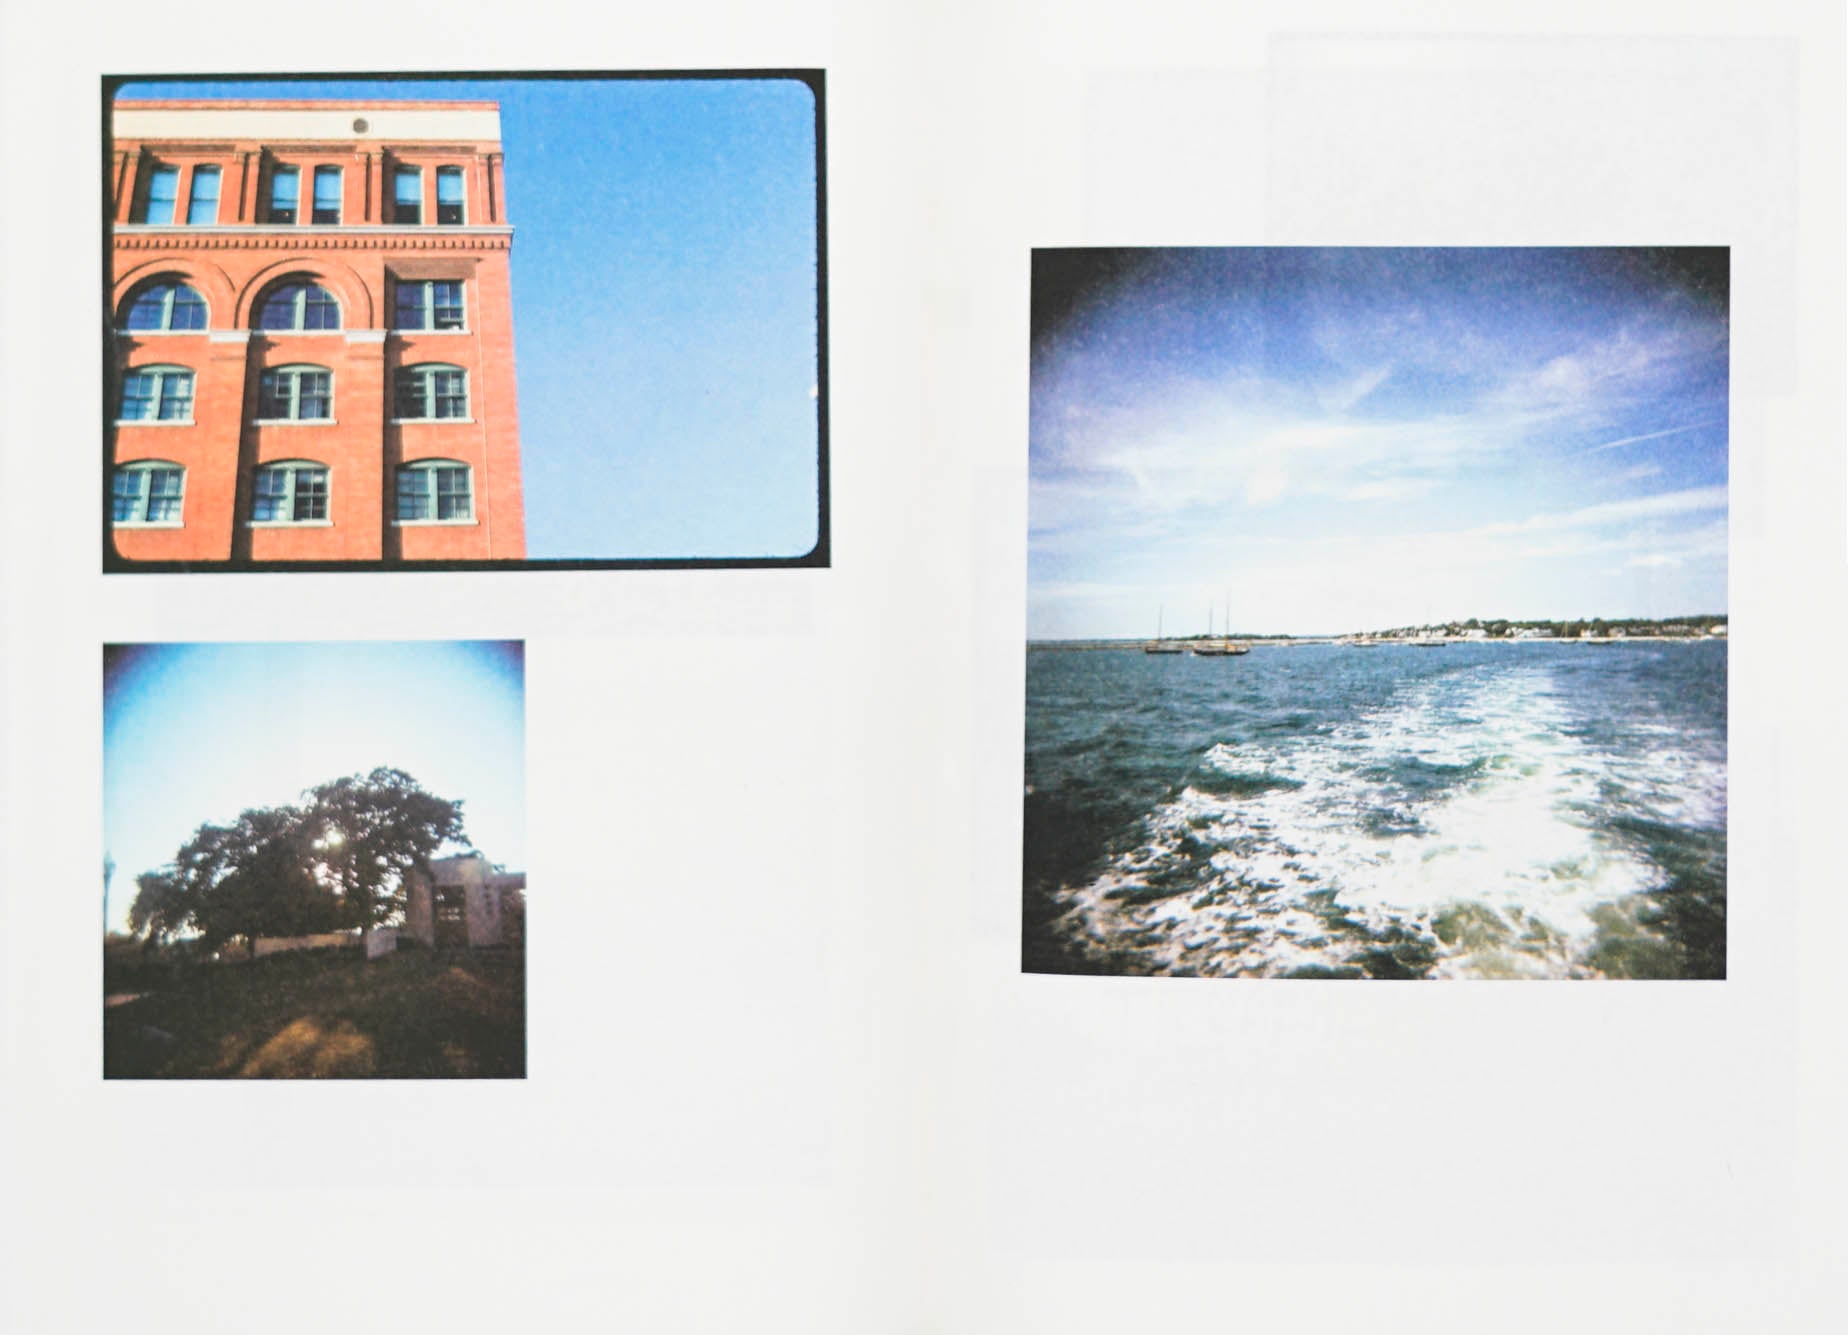 Book spread three film photographs of a building, a tree backlit from the sun, and boats on water